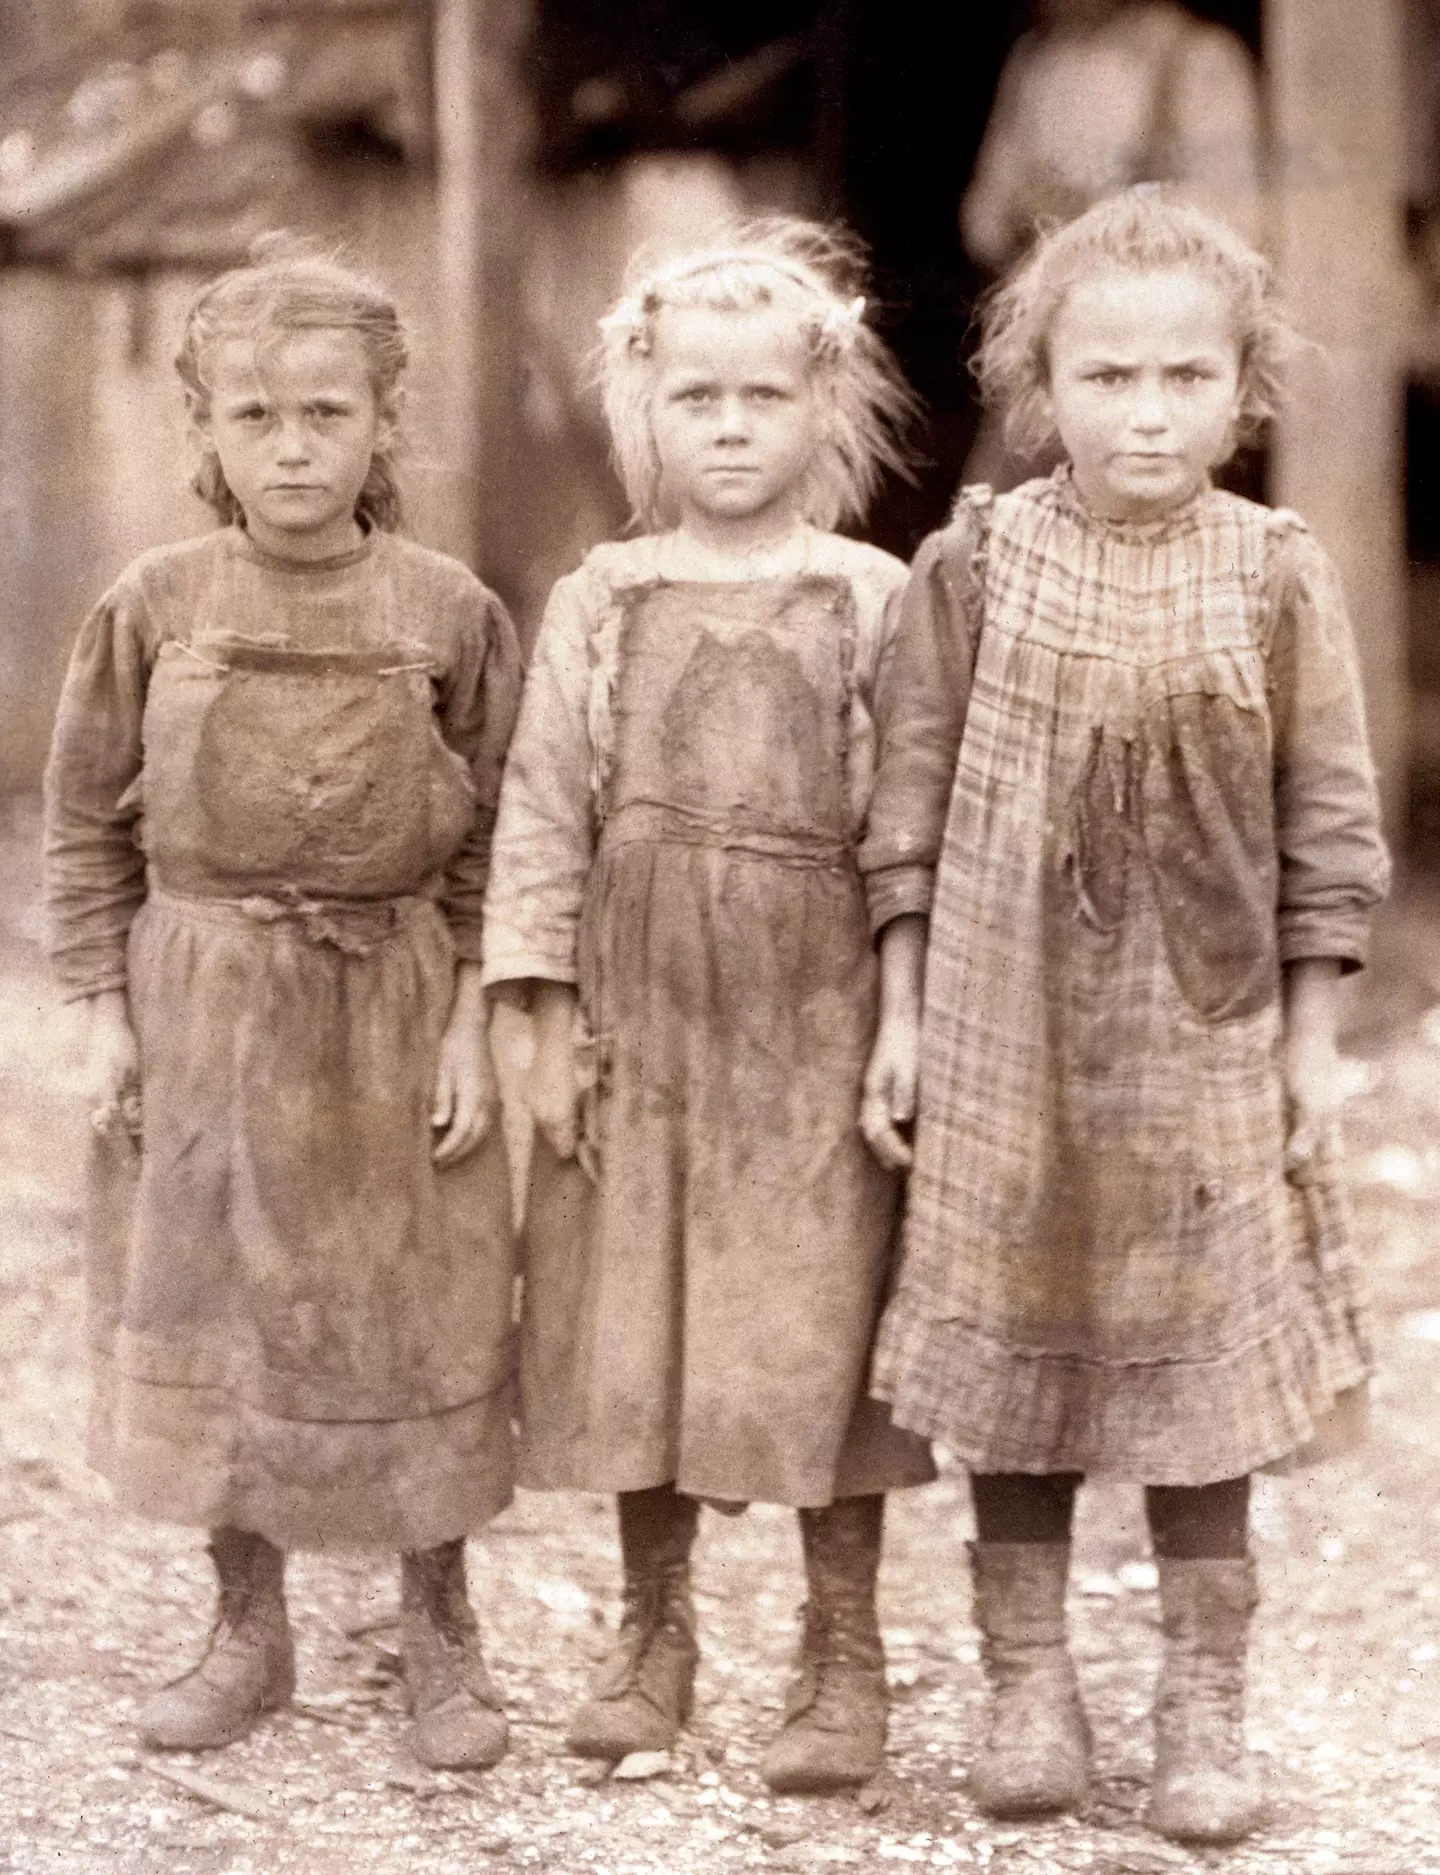 Lewis Hine documented child labor before it was banned.